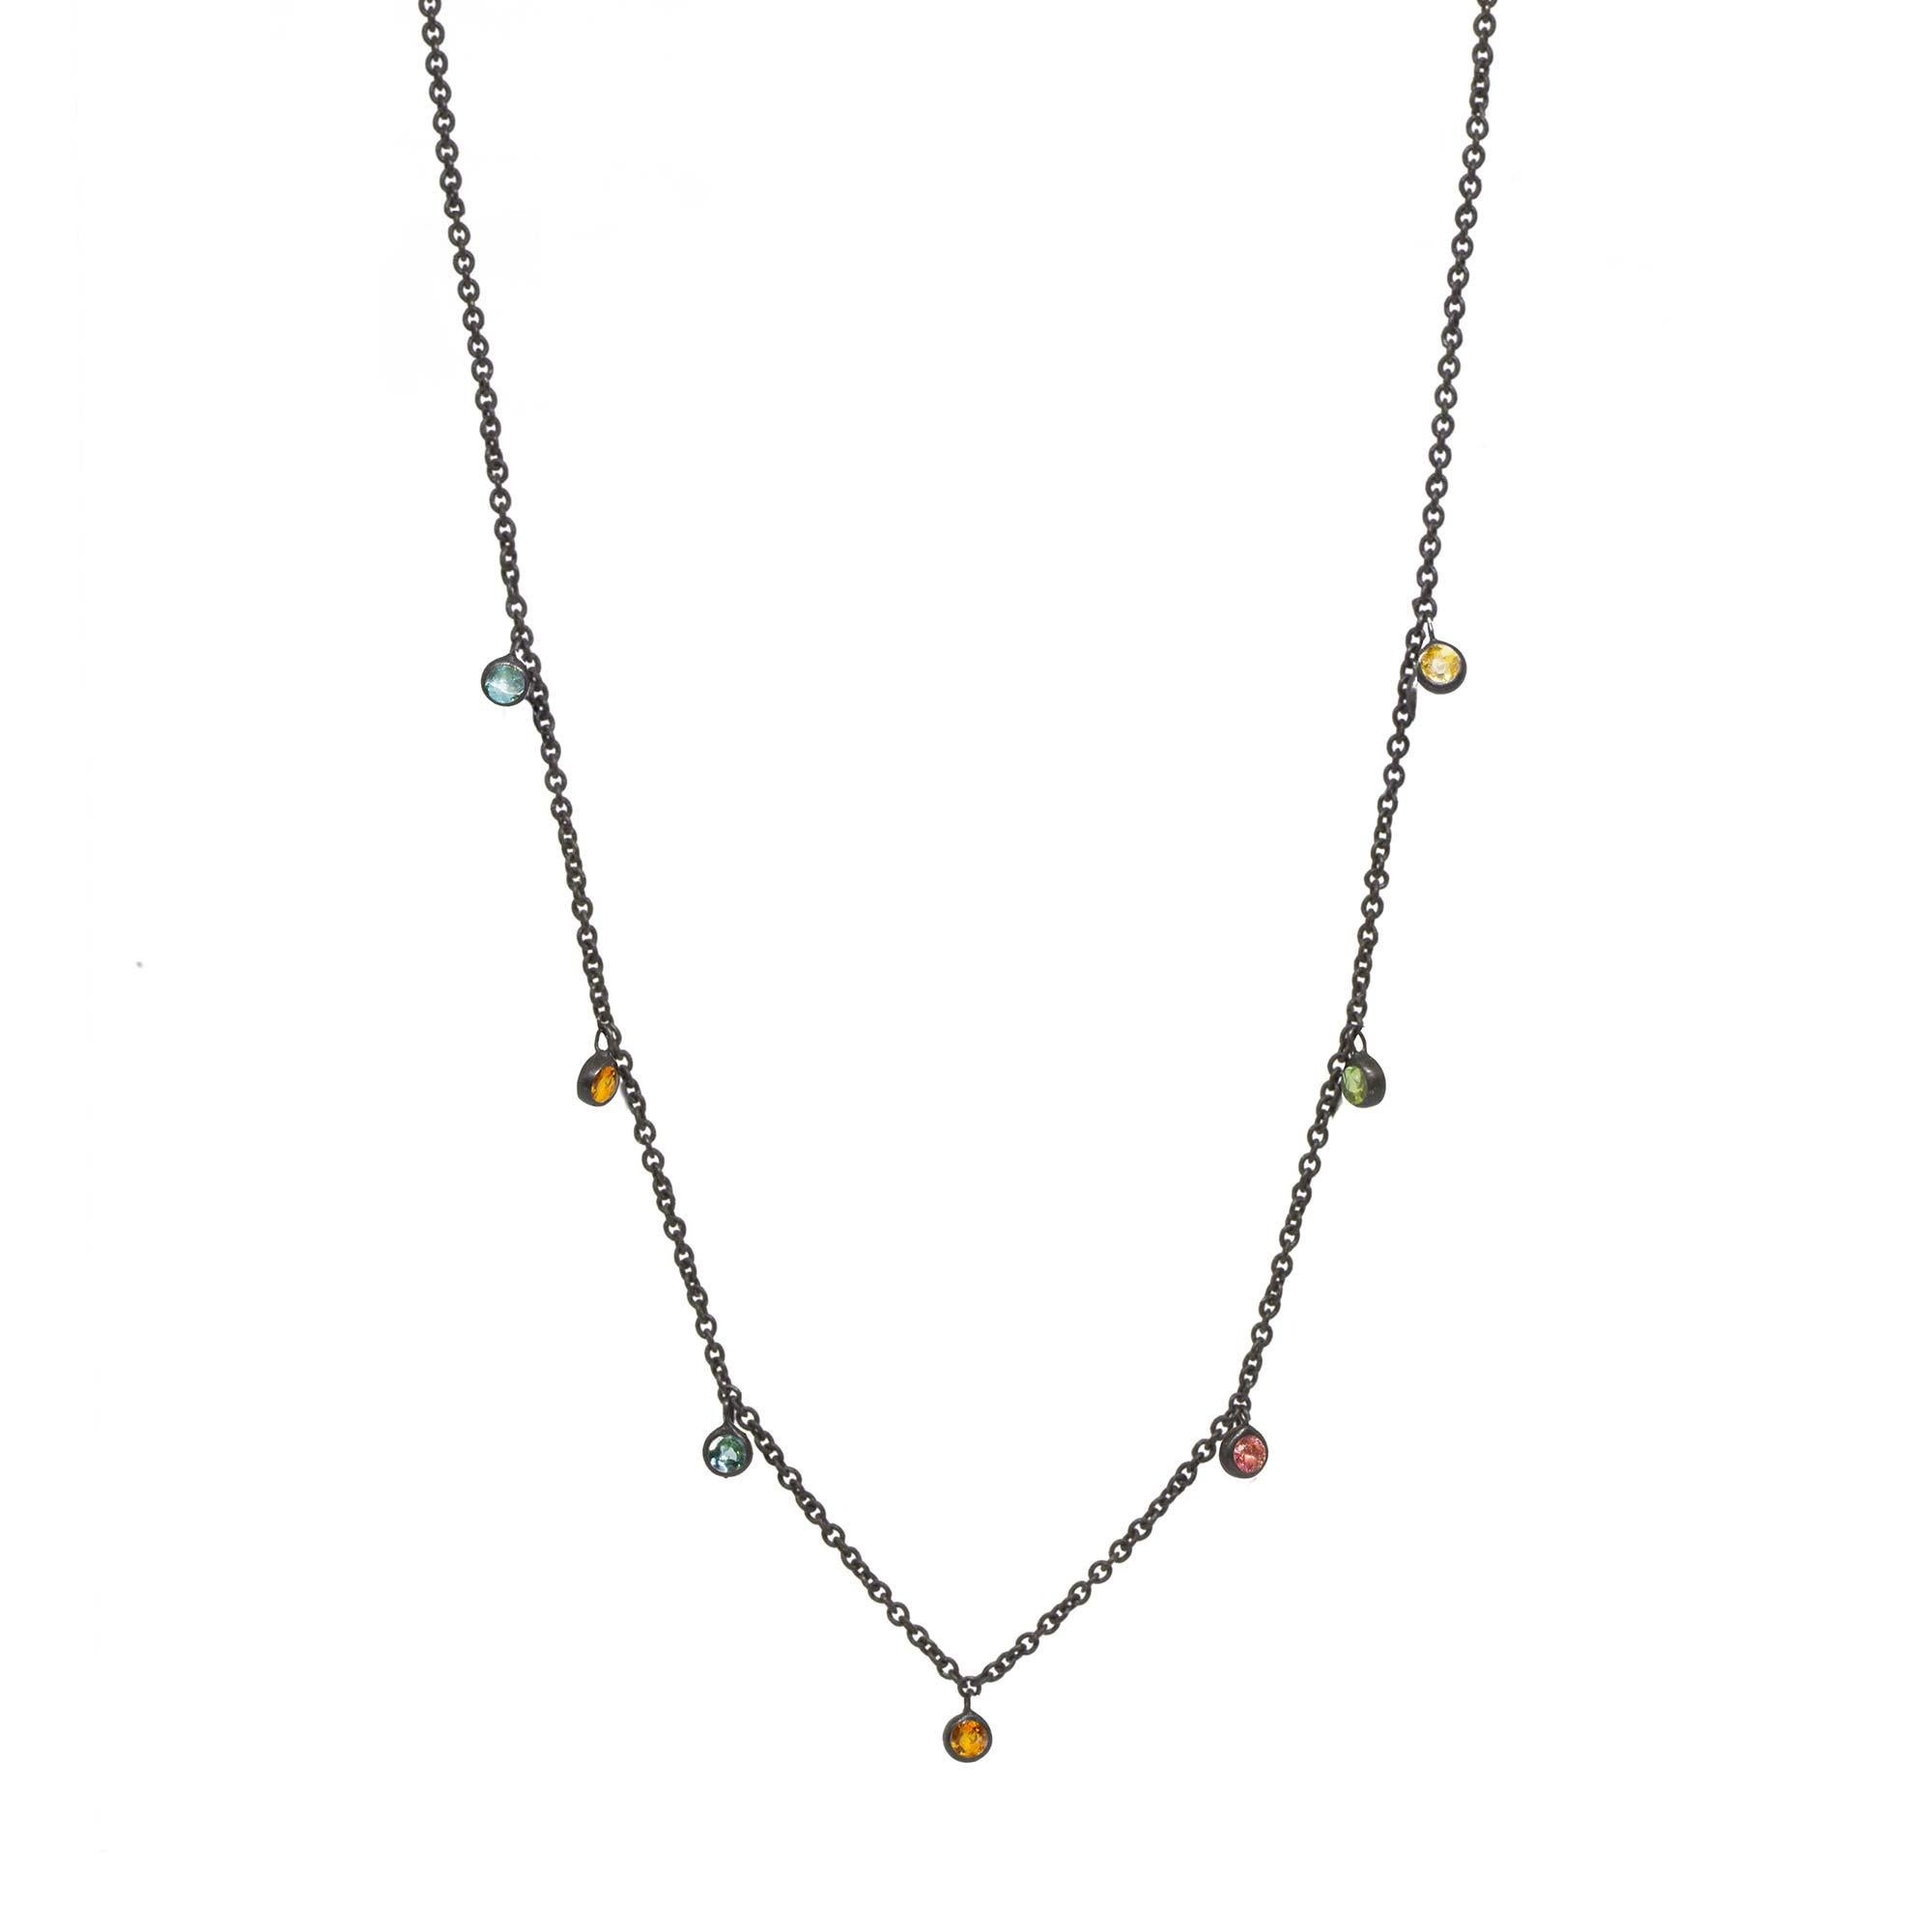 Made with multi tourmaline gemstone rimmed in black oxidized silver, our Forged Silver Necklace provides an effortless, yet fashionable style. 

Metal: Black Oxidized Silver
Stone carat: 0.75
Length: 15-17''
Stone size: 2.5mm

About the